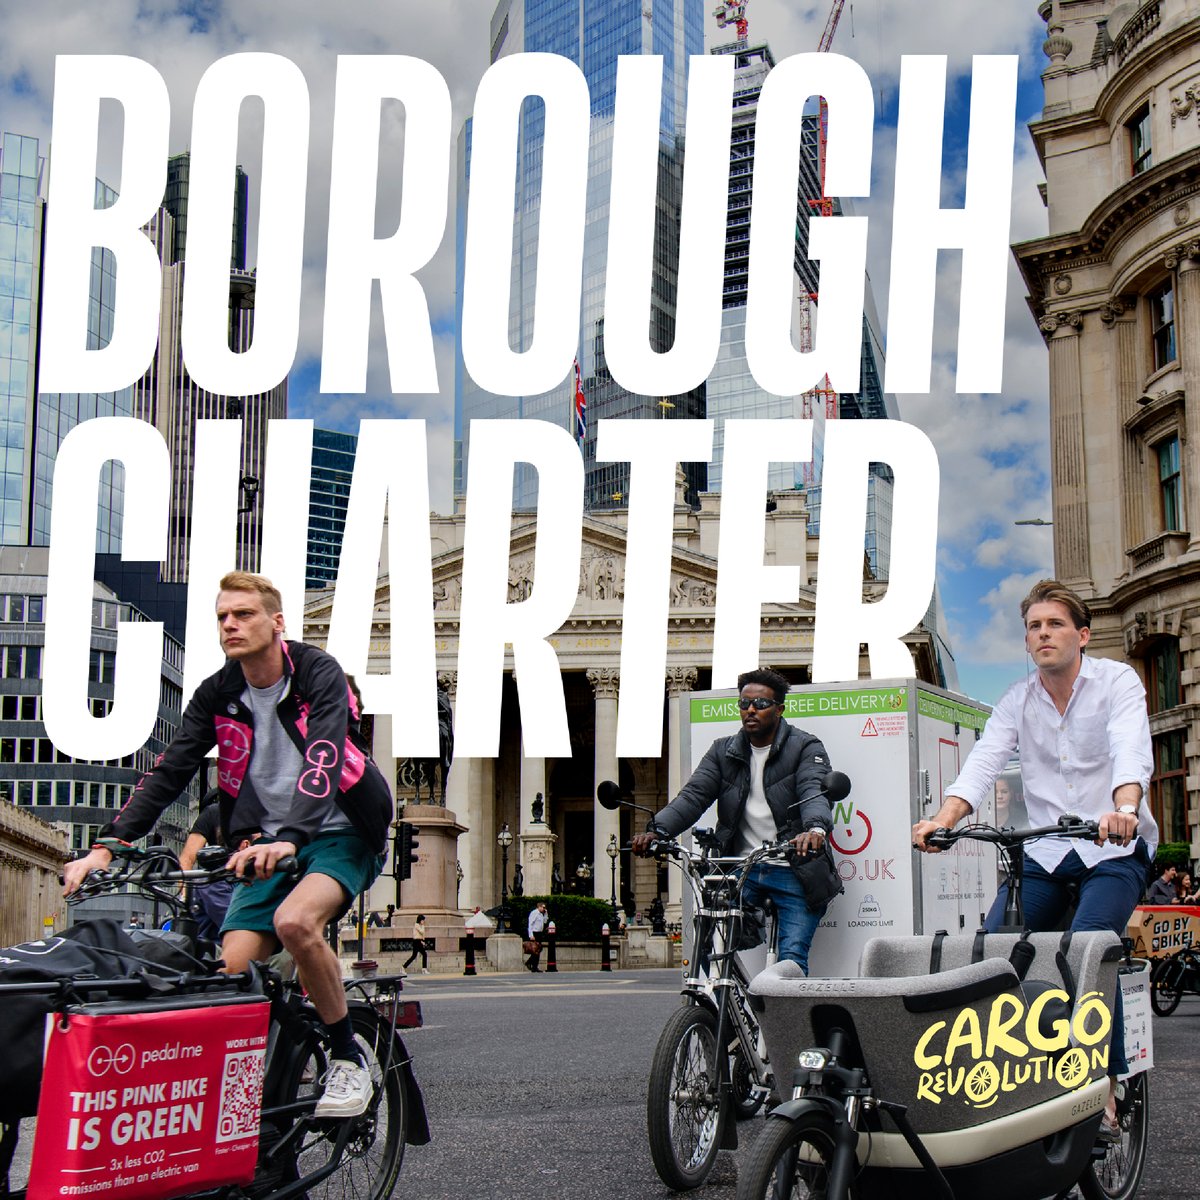 1. So what is the Cargo Bike Borough Charter? 🧵 1/5